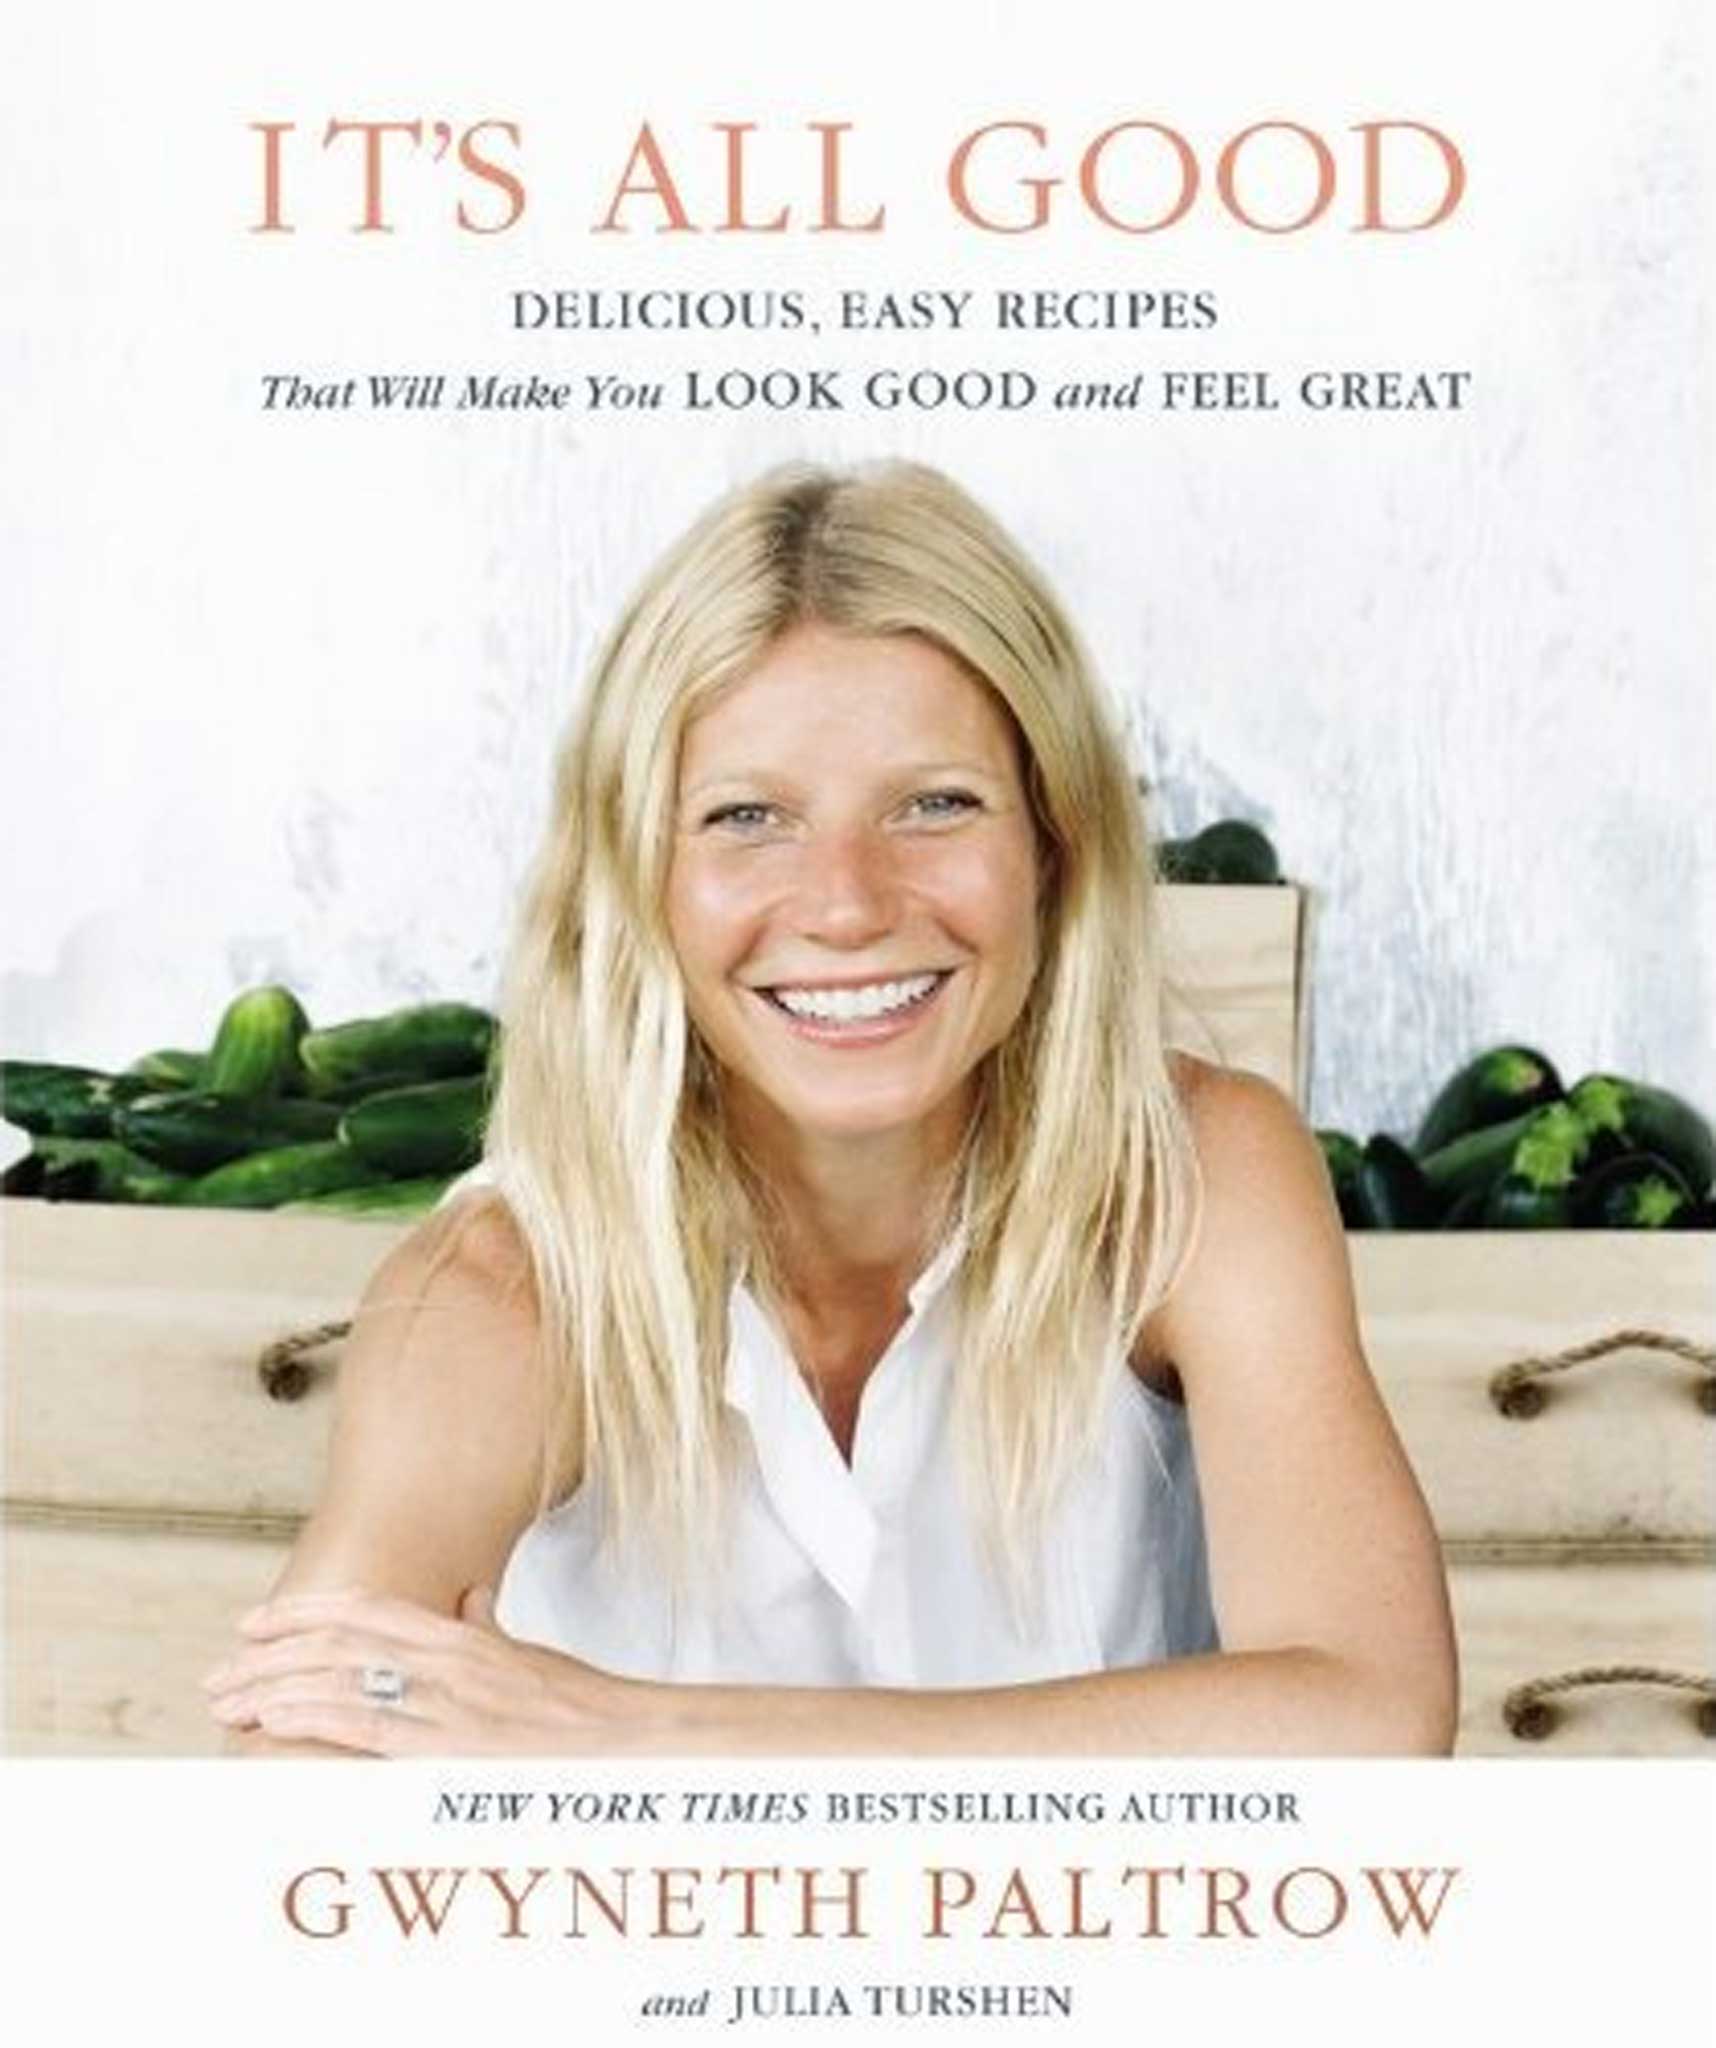 This book derives from Paltrow's allergy-inspired decision to renounce most dietary elements - cow dairy, gluten, sugar, alcohol etc - while continuing with ingestion